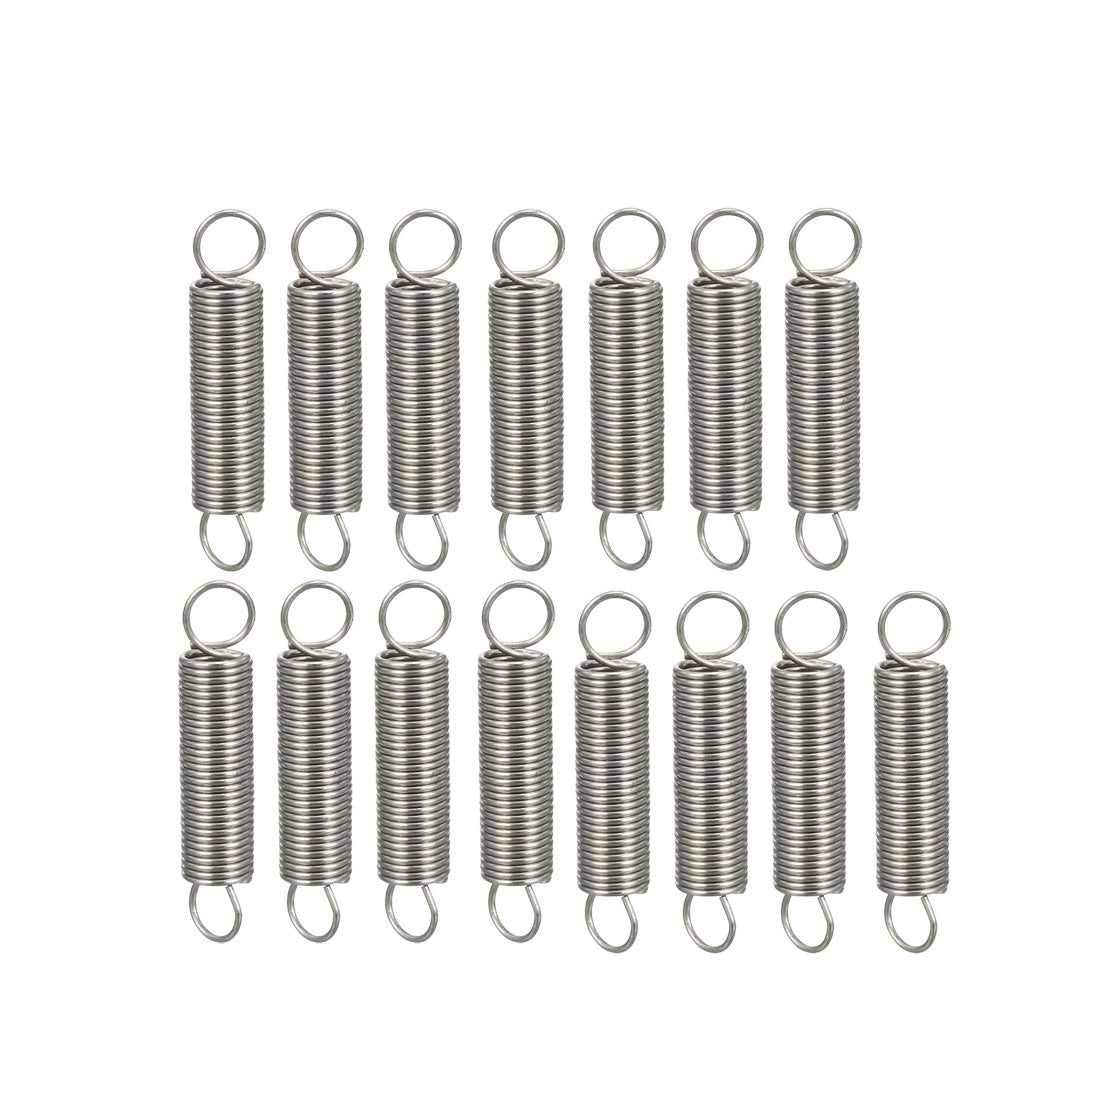 uxcell Uxcell Extended Tension Spring Wire Diameter 0.016", OD 0.16", Free Length 0.79" 15pcs